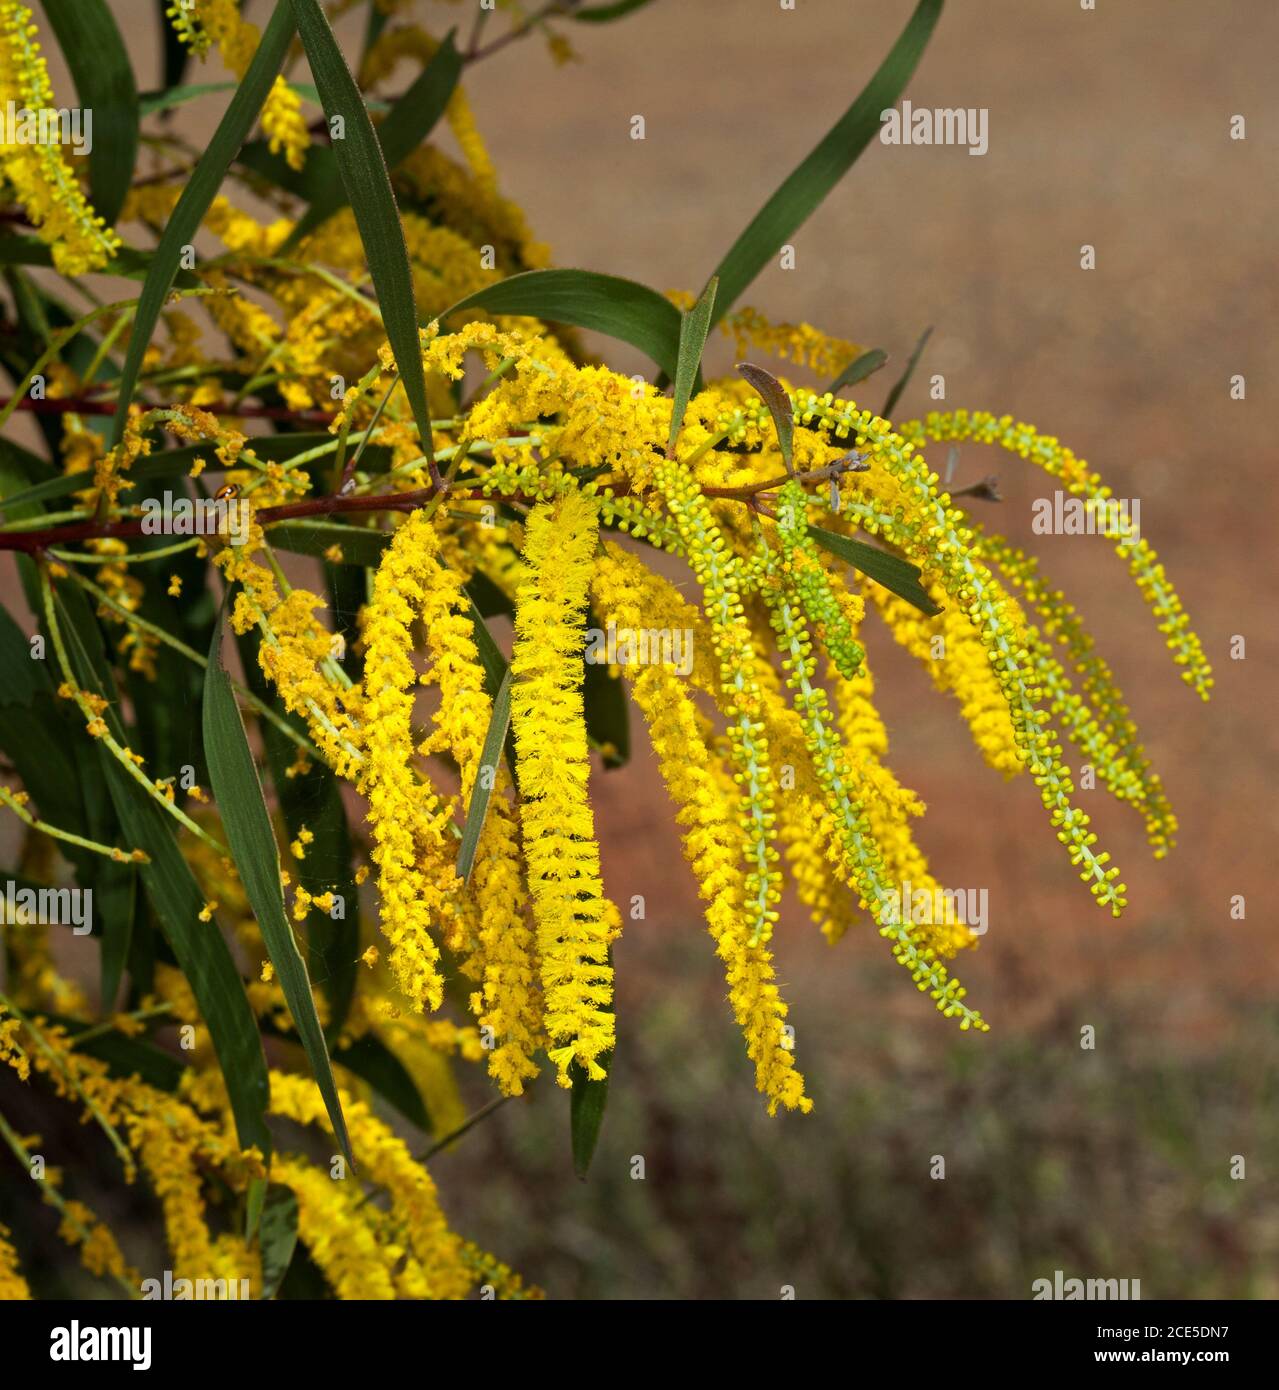 Cluster of long vivid yellow flowers and green leaves of wattle tree, Acacia crassa subspecies longicoma, in outback Australia Stock Photo